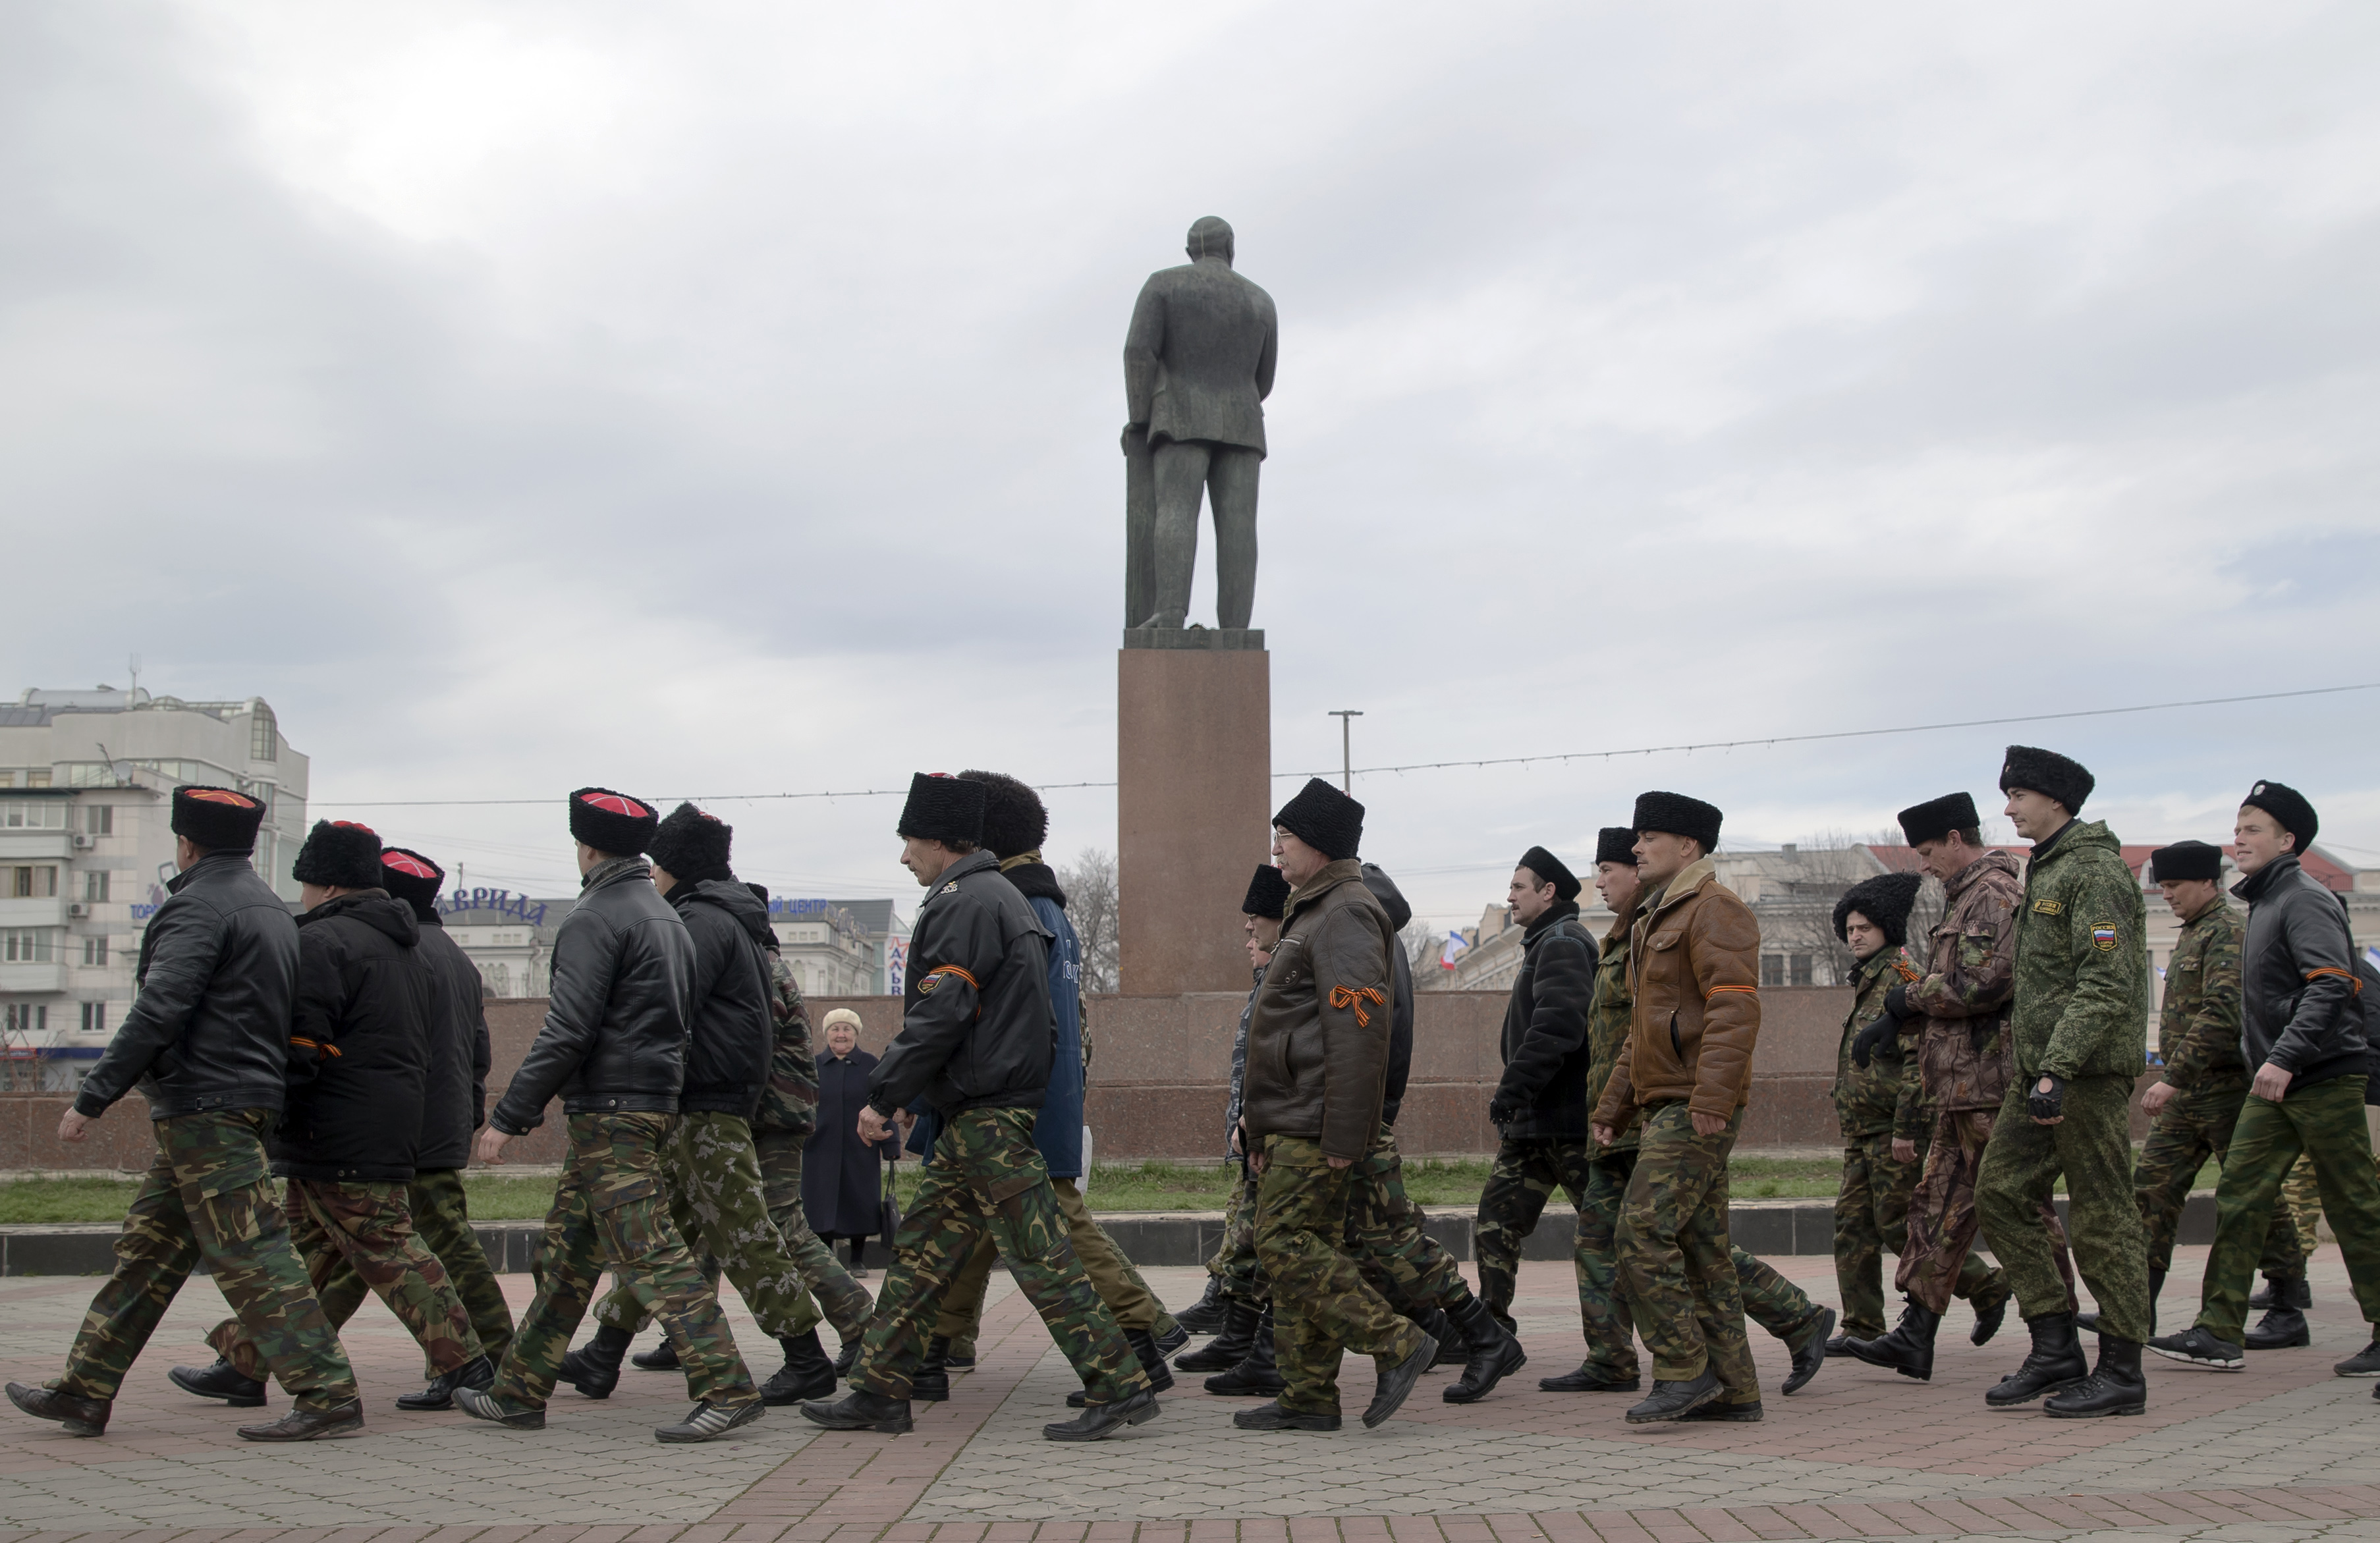 Russia fever is everywhere in the streets of Crimea ahead of a referendum. Photo: AP